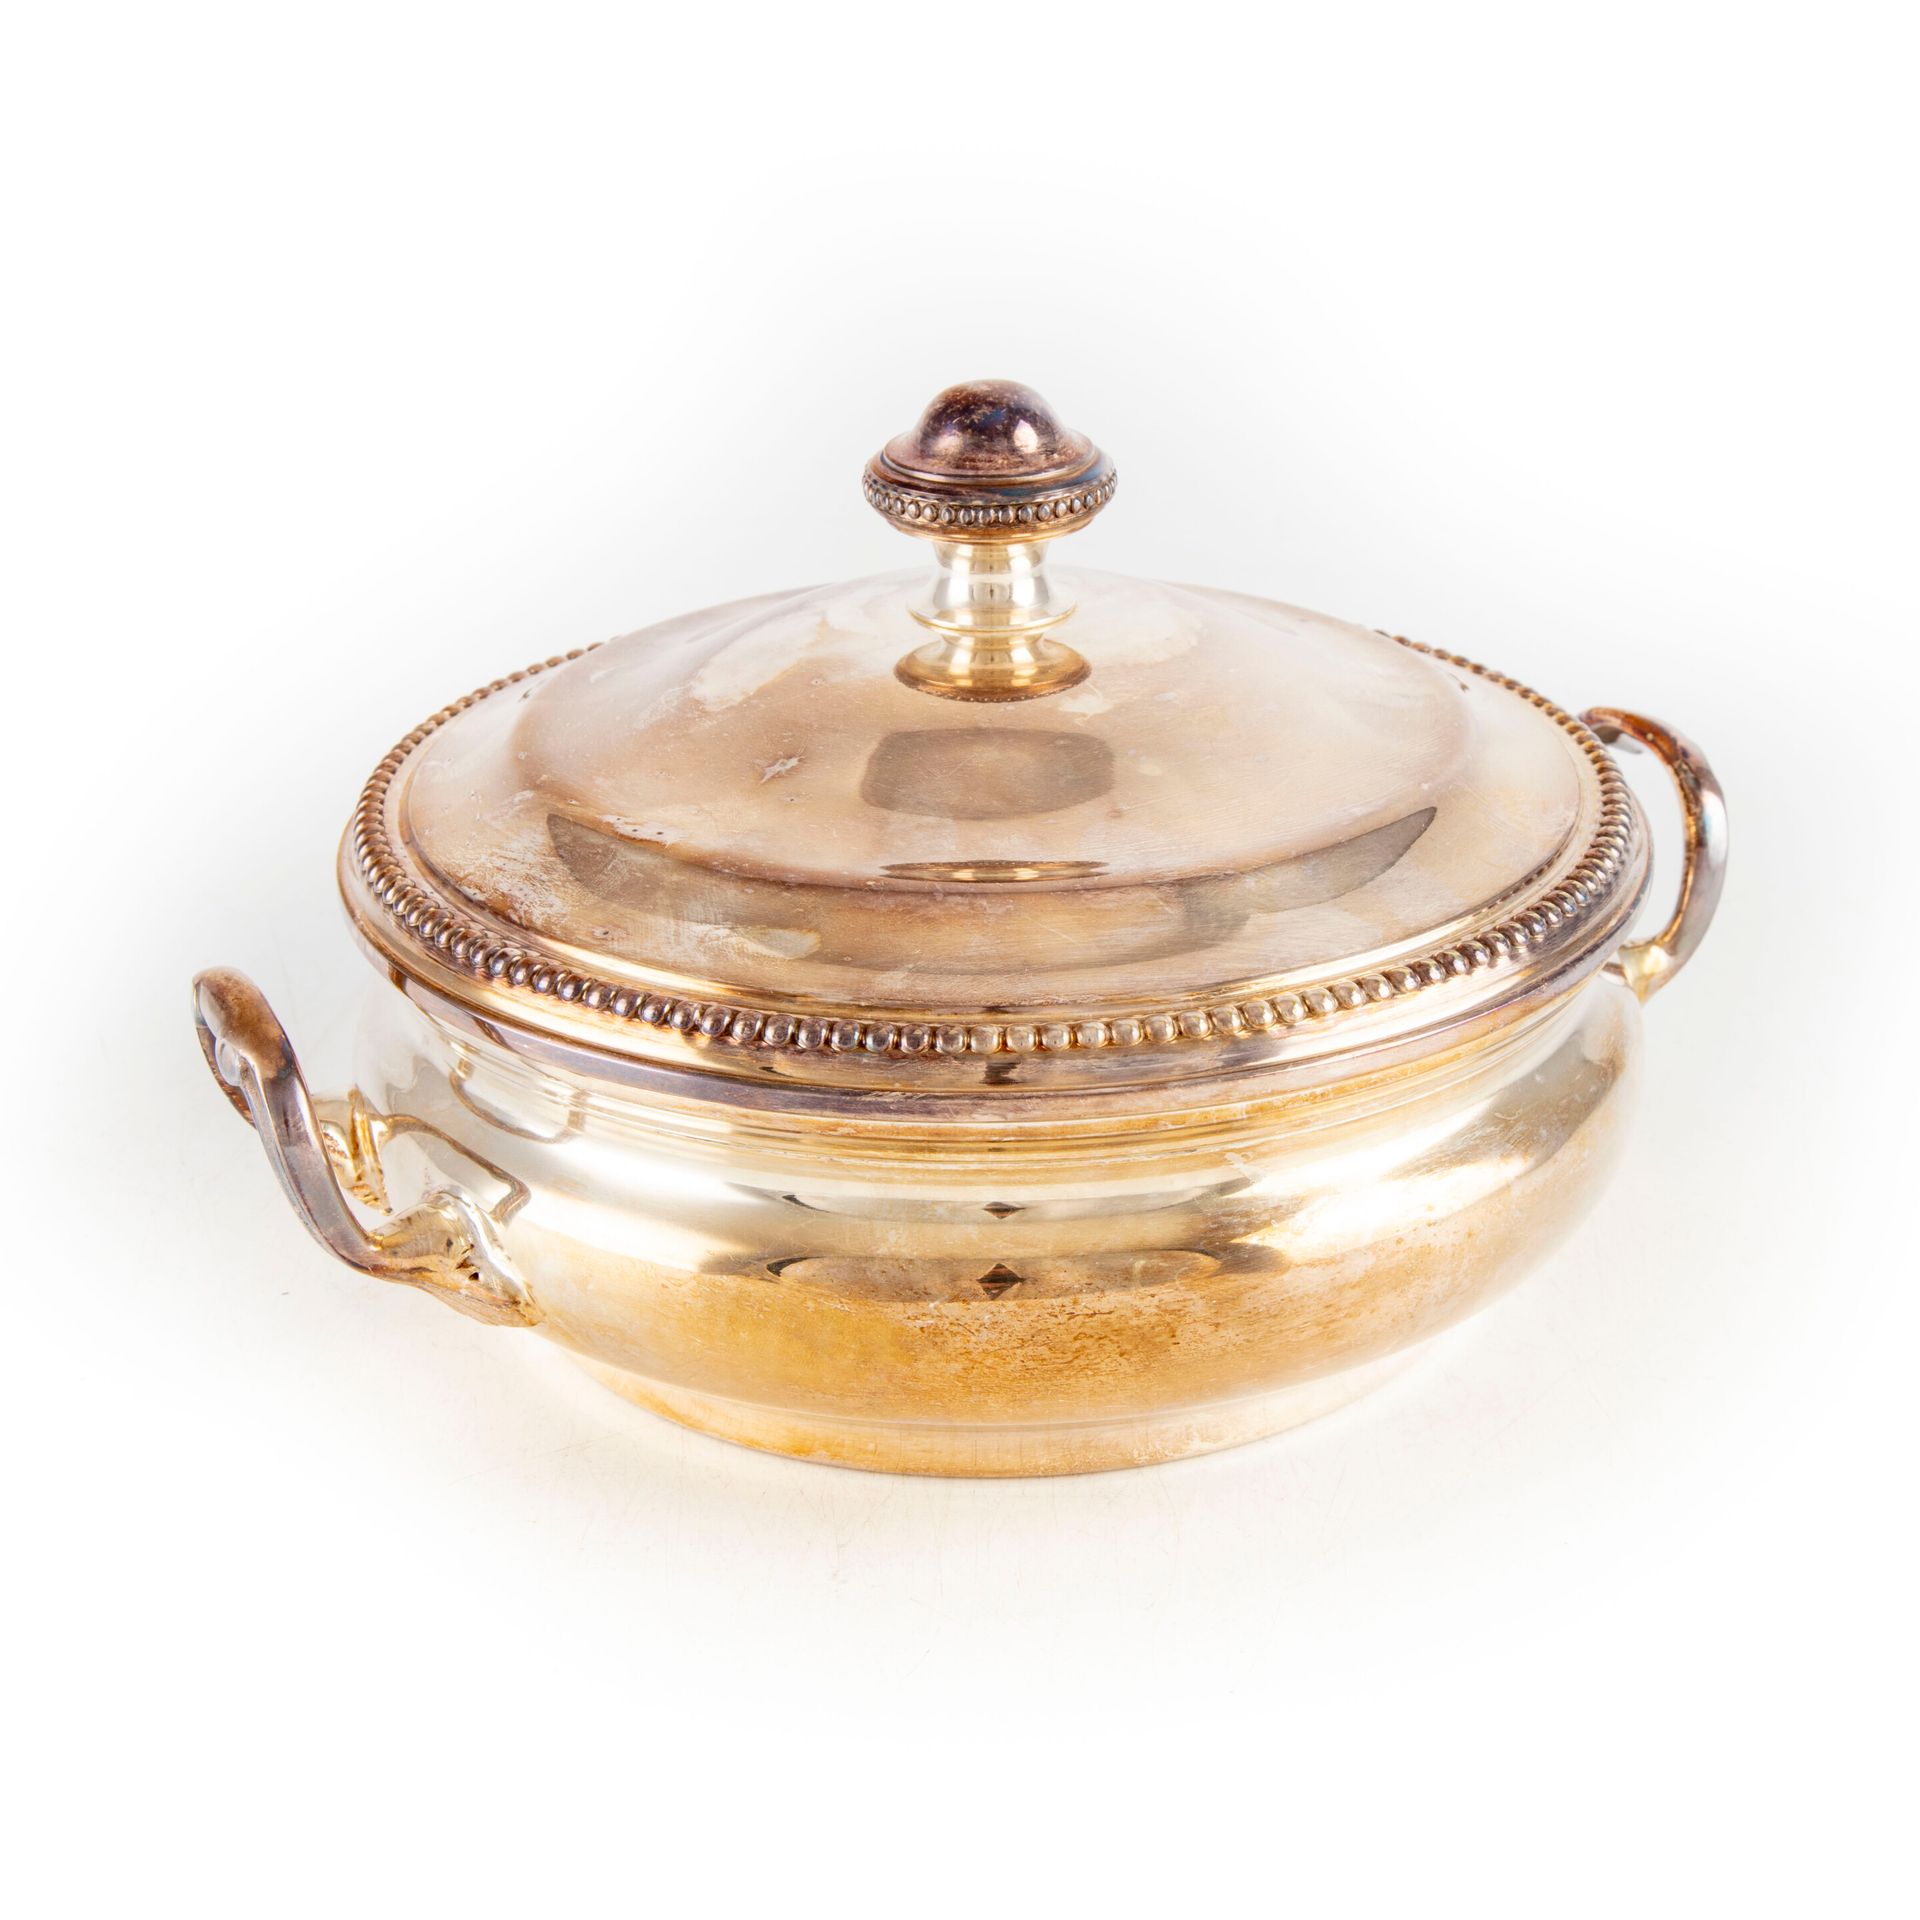 Null Silver plated covered vegetable dish with pearl frieze decoration

D. 26 cm